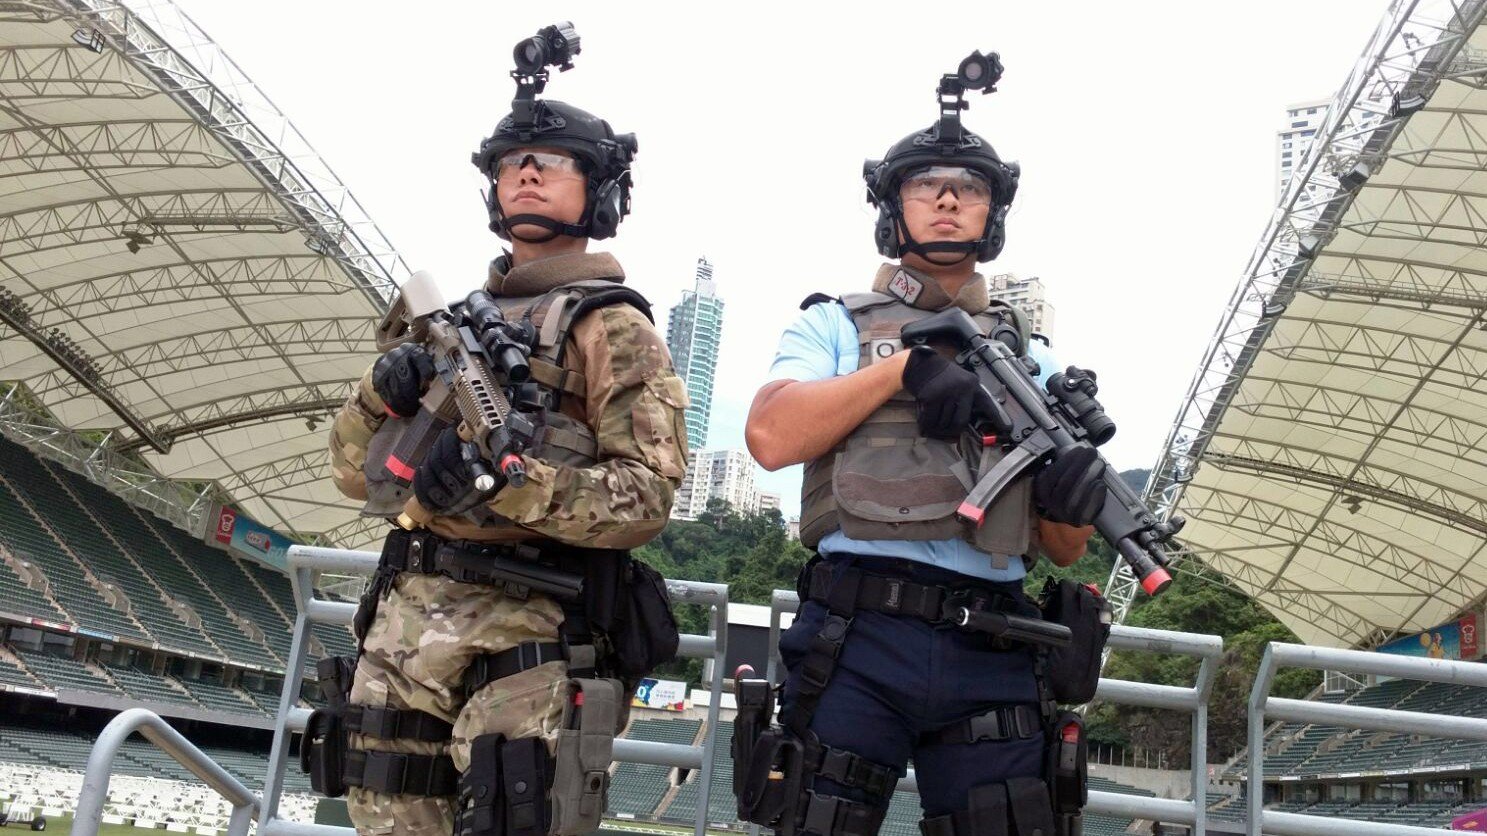 The exercise tested officers’ preparedness for threats at such events. Photo: Felix Wong